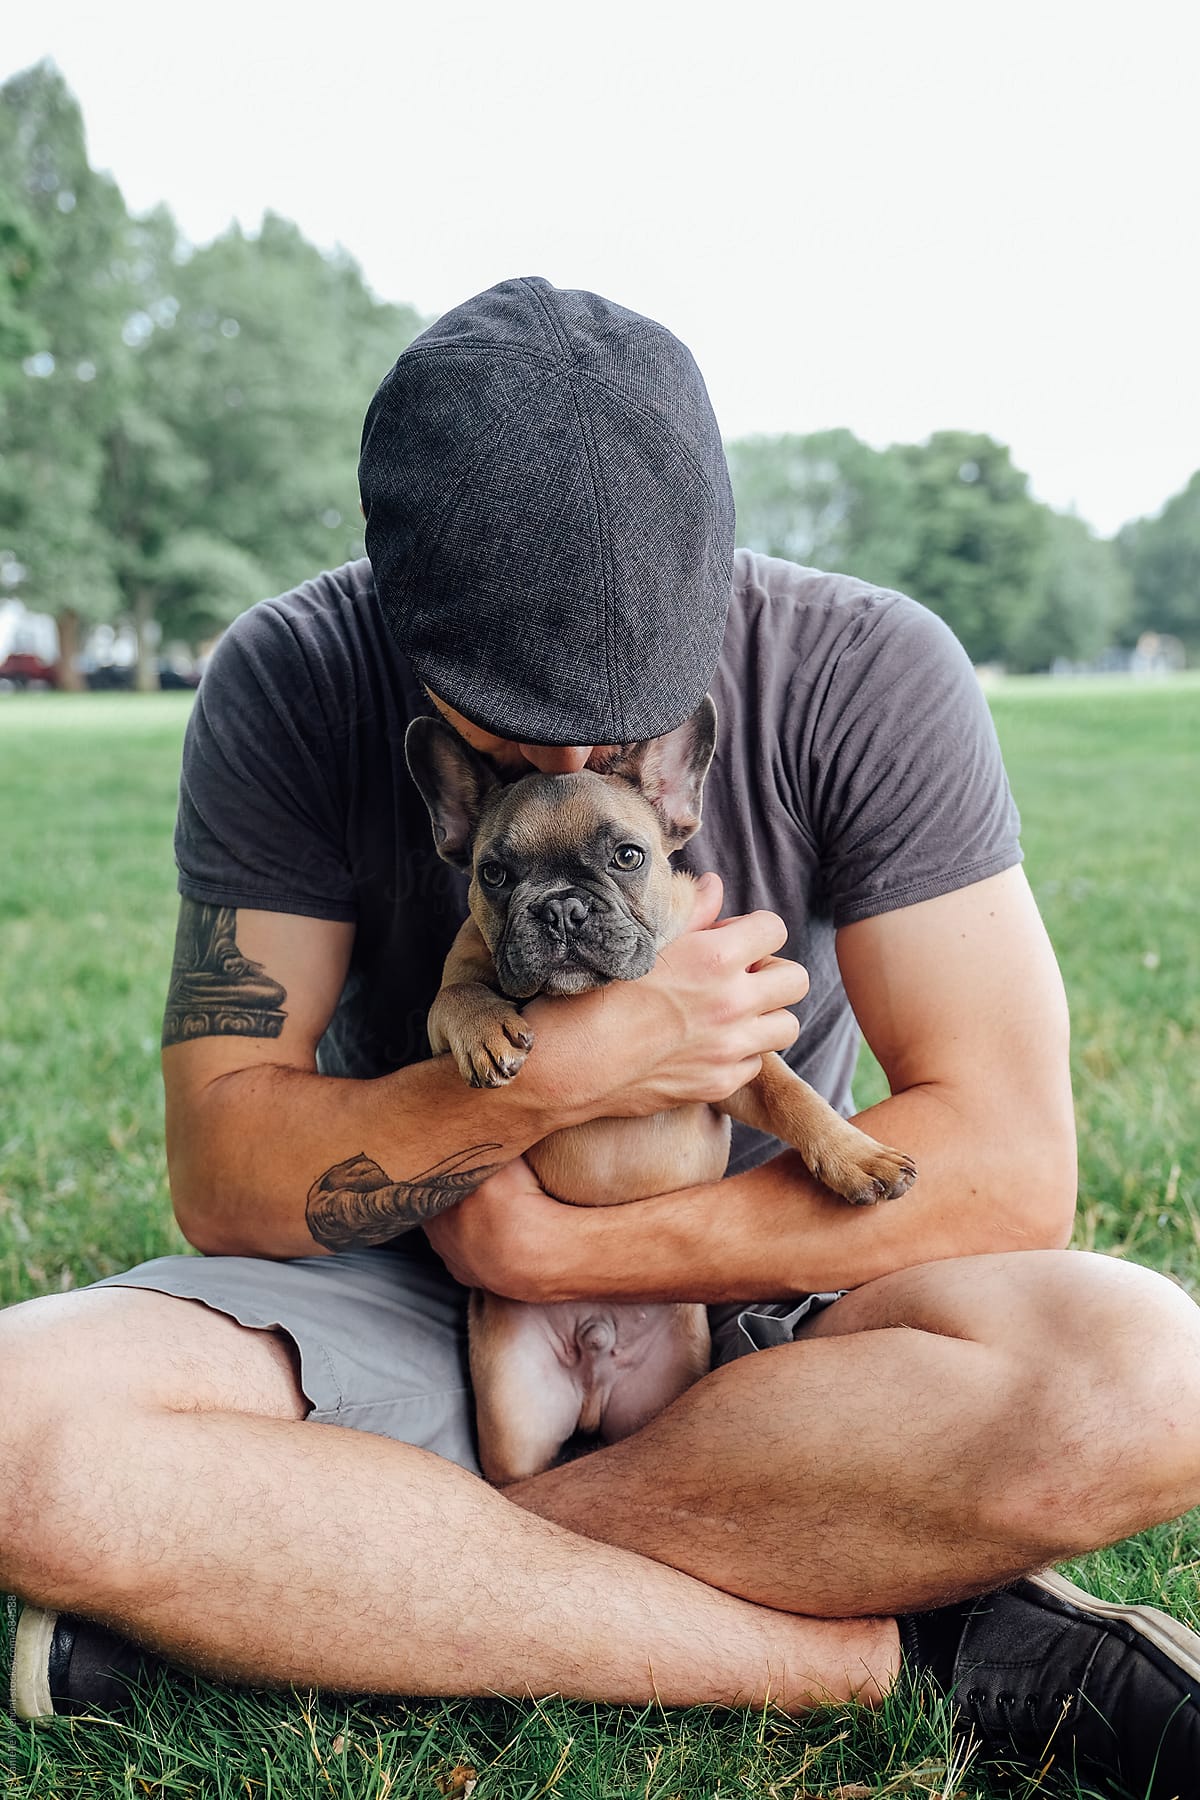 A french bulldog puppy being held and cuddled by a strong caucasian man.